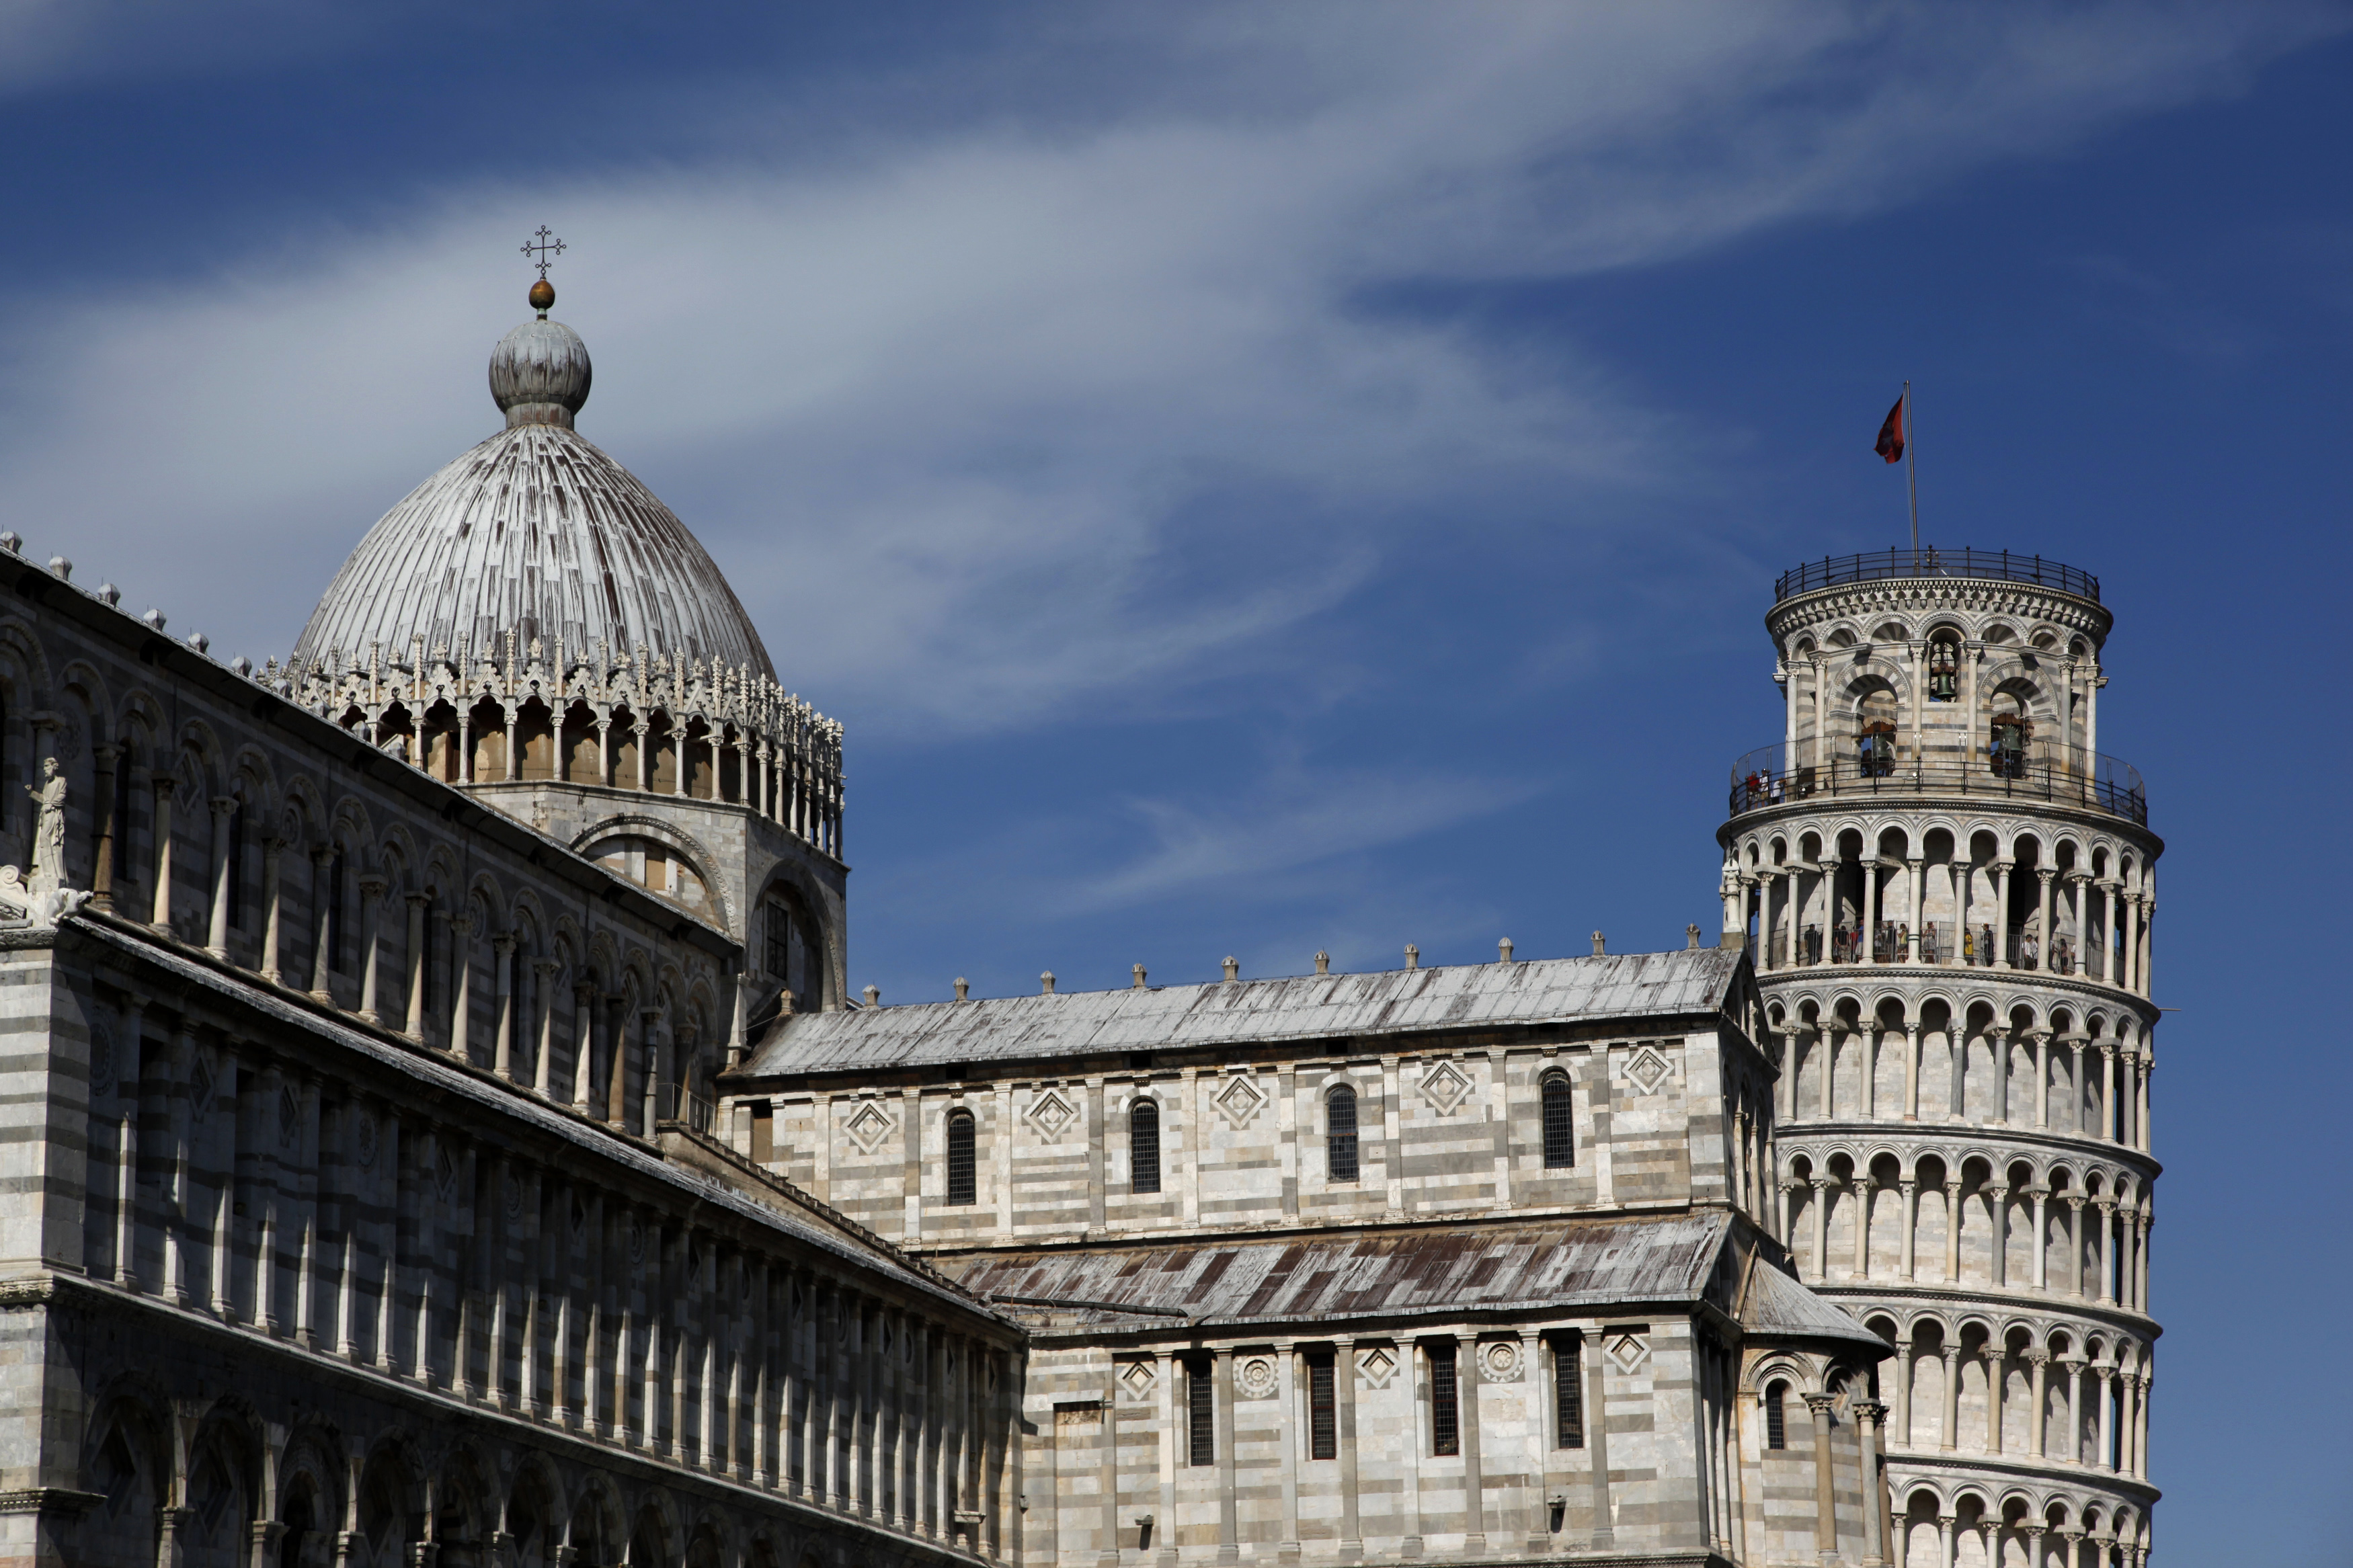 The Leaning Tower of Pisa is seen behind the Cathedral